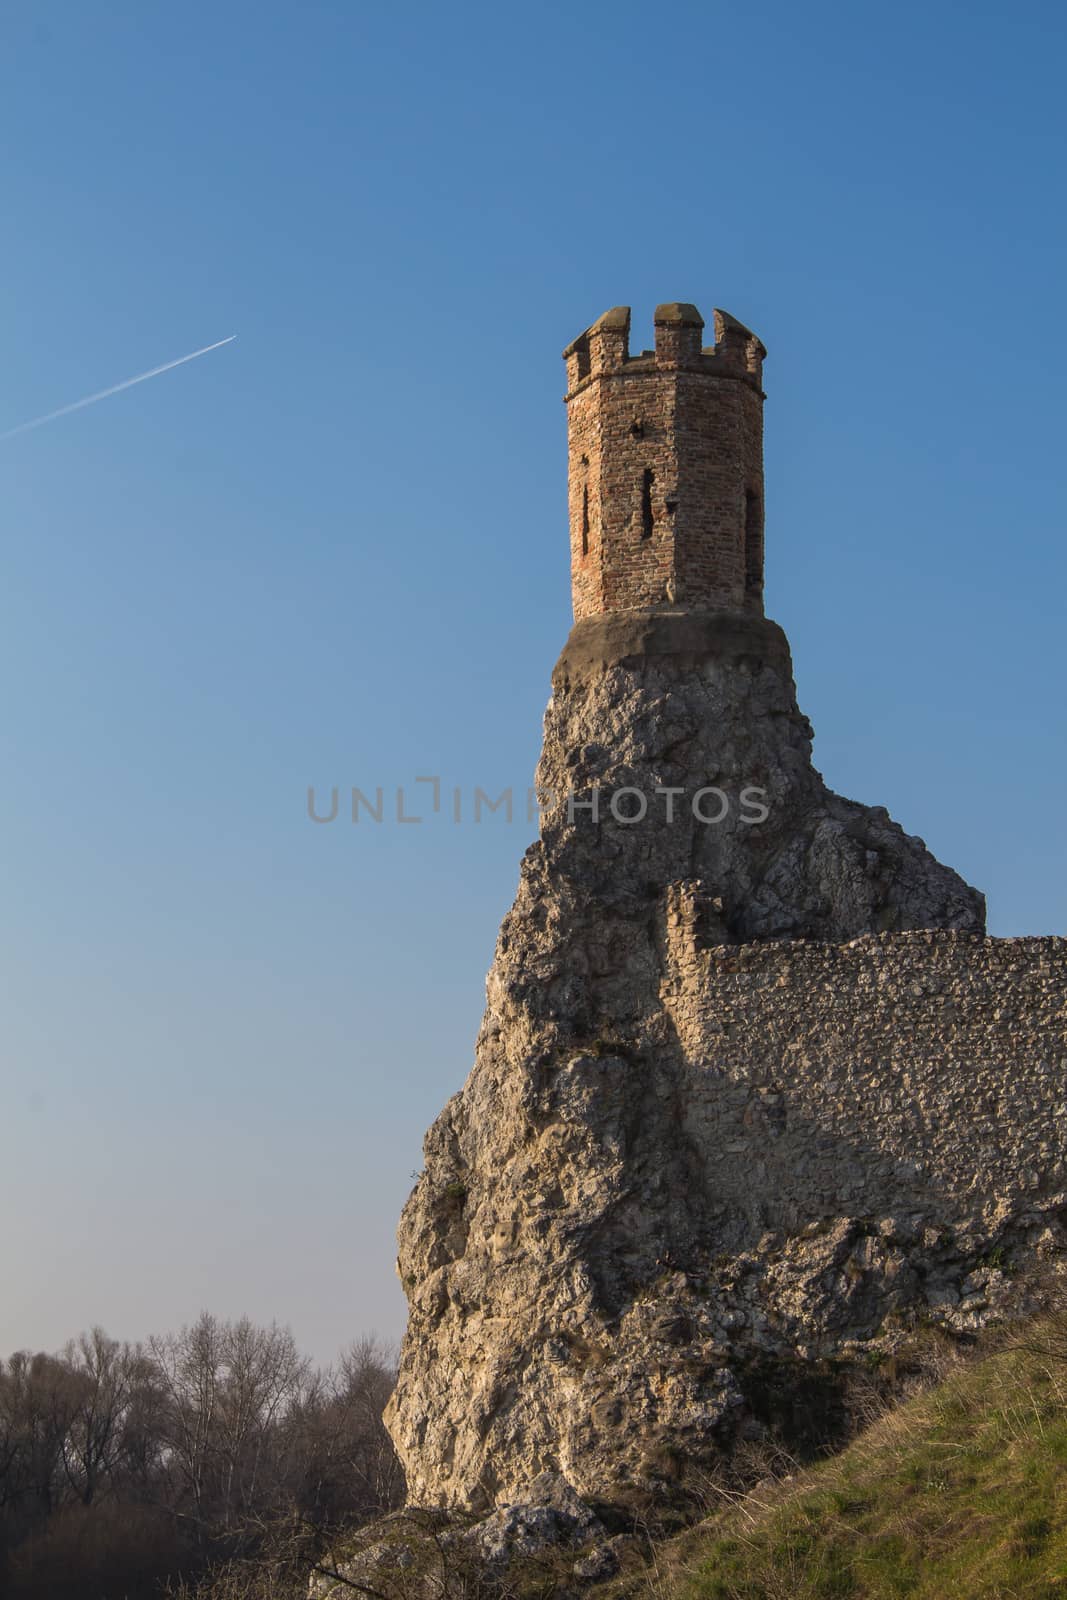 Rocks of the former fortress with a Maiden Tower, part of ruins of castle and fortress Devin in Slovakia. Bright blue sky.